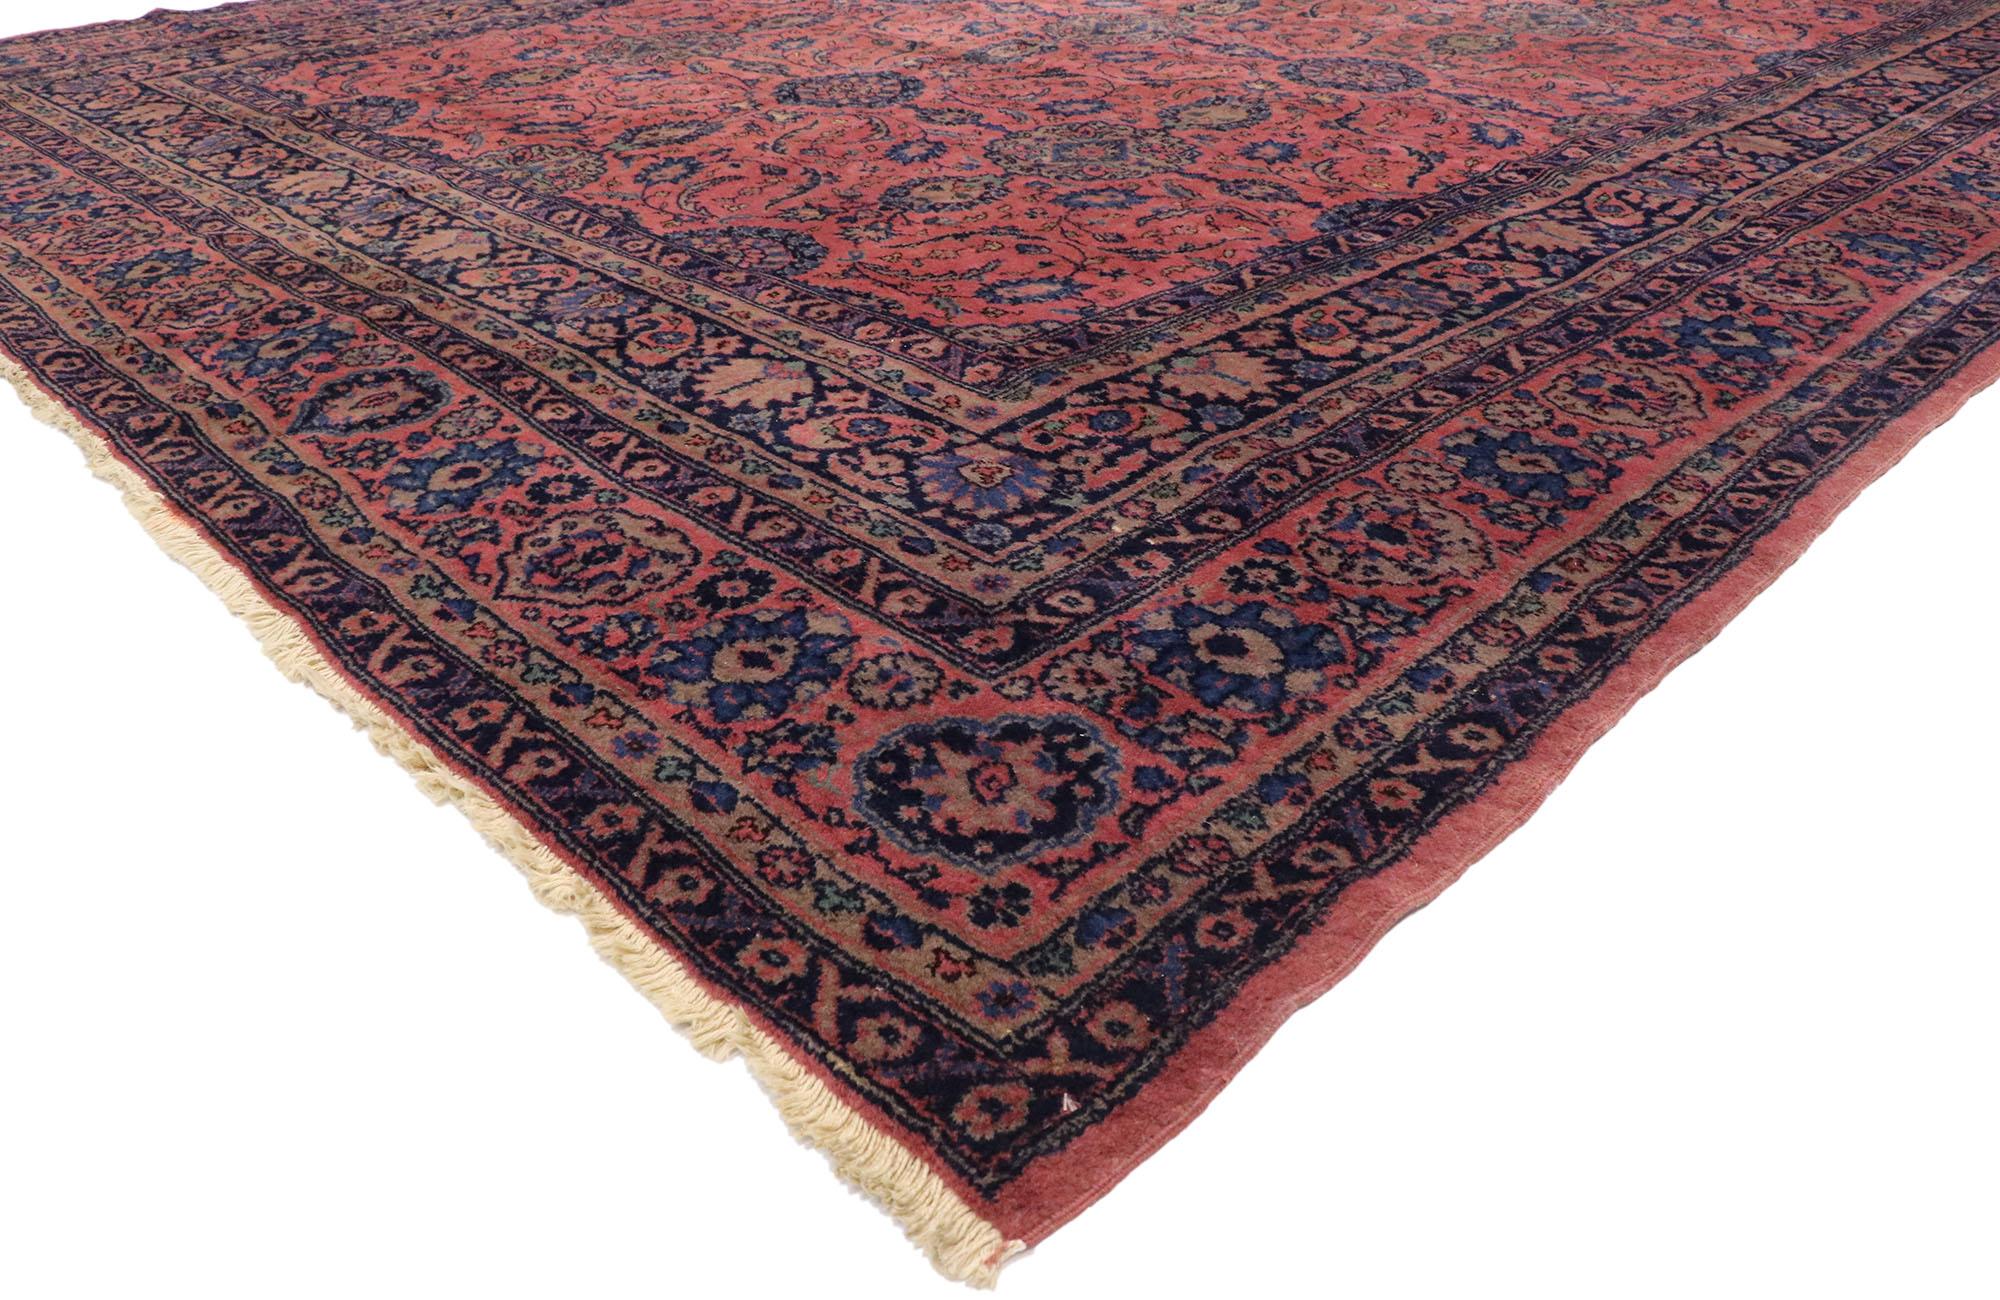 71994, antique Turkish Sparta Palace size rug with Luxe Regency Venetian style. Rich in color, texture and beguiling ambiance, this hand knotted wool palace size antique Turkish Sparta rug beautifully embodies a luxe Regency style with Venetian